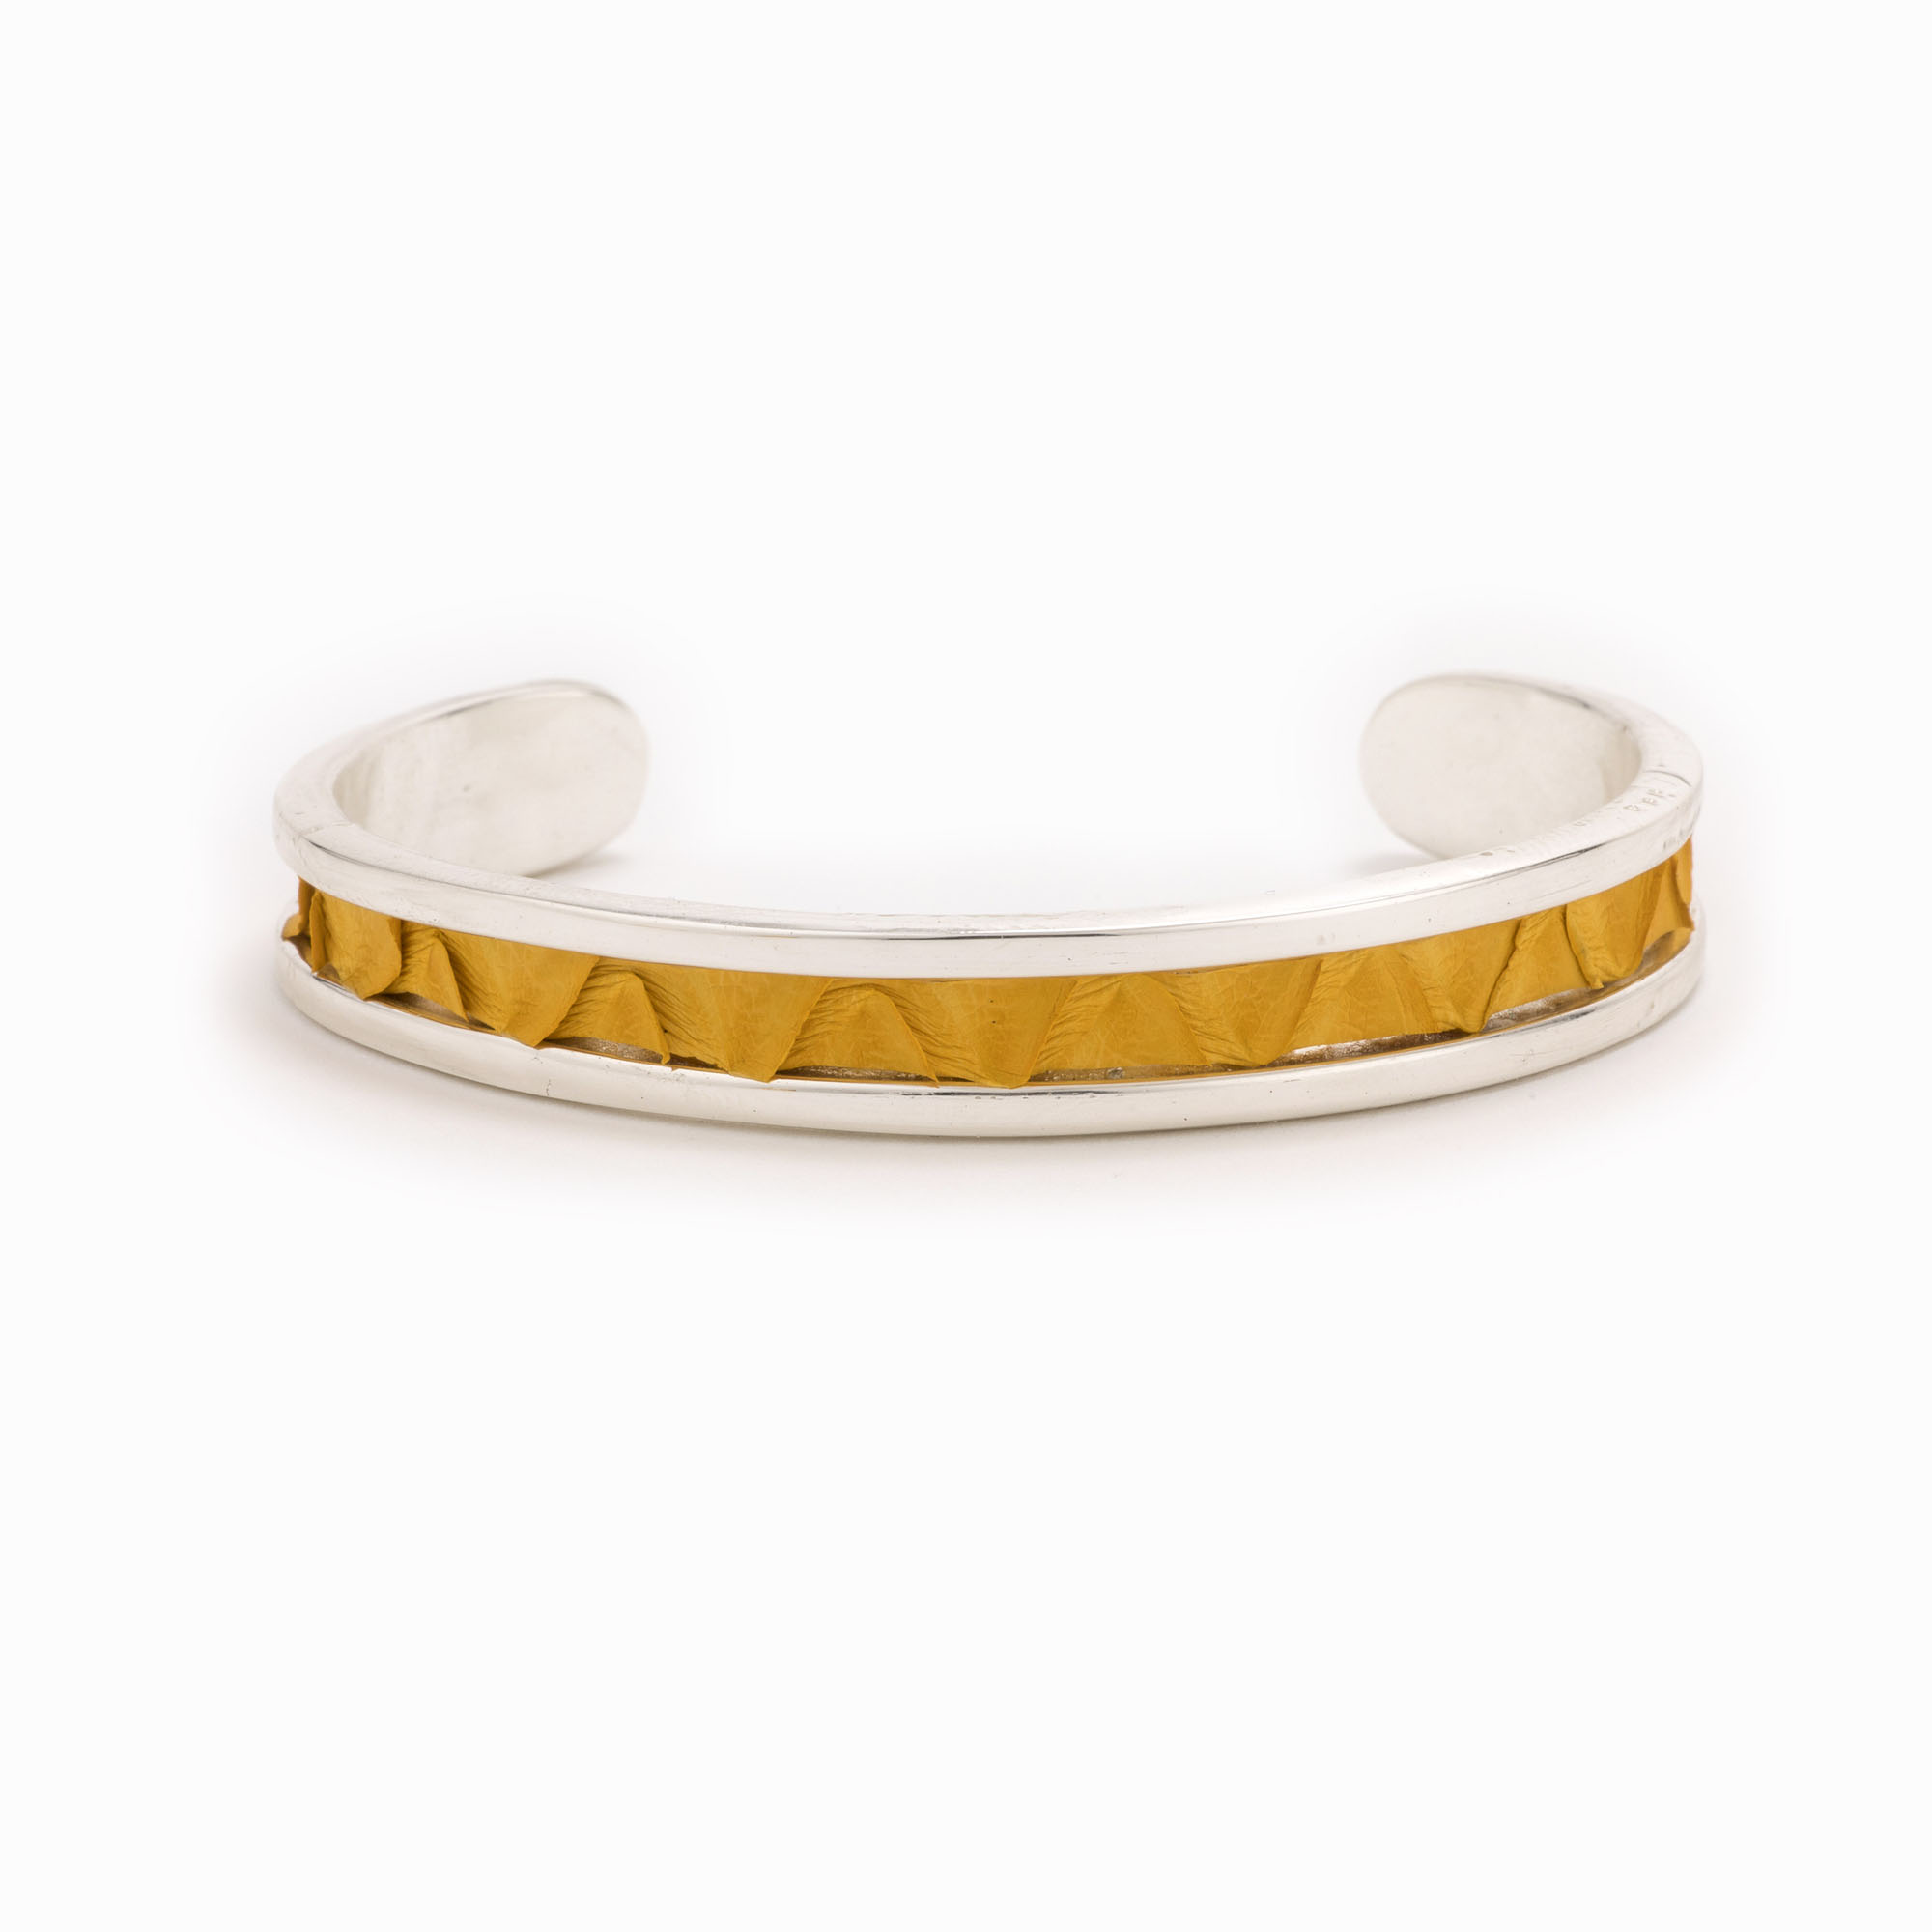 Featured image for “Small Mustard Silver Cuff”